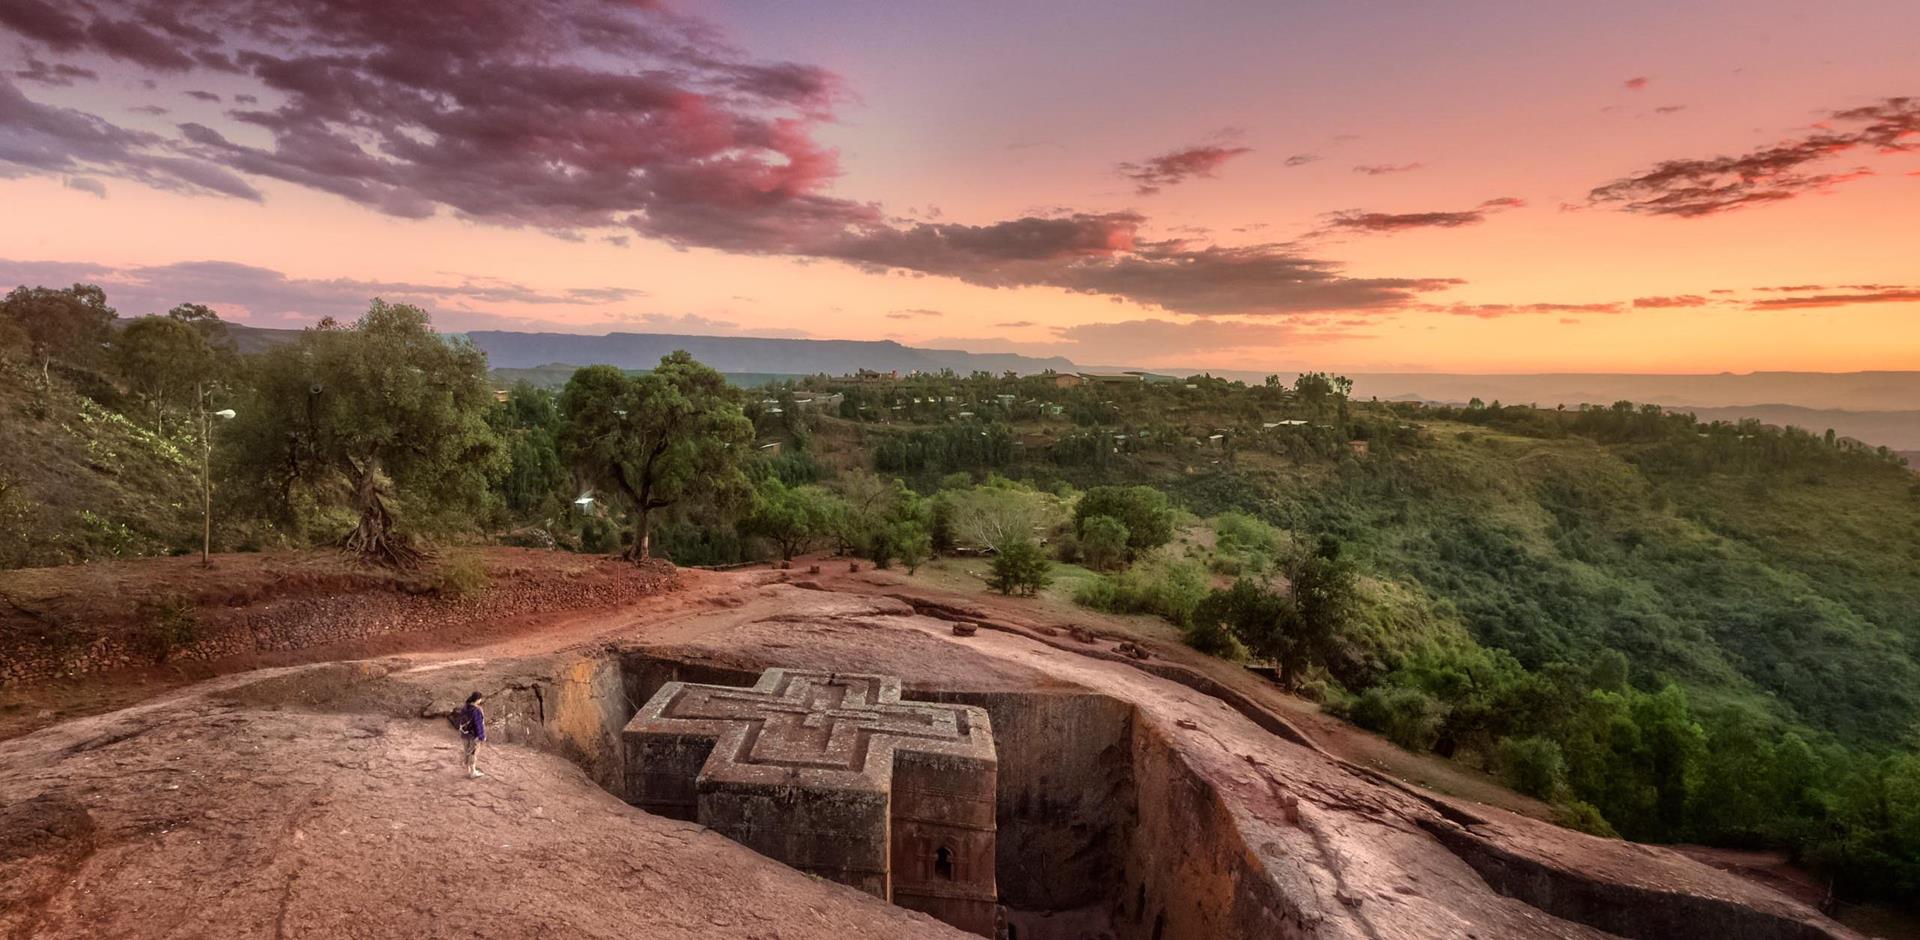 A&K itinerary: Tribes & Traditions of Ethiopia Escorted Tour